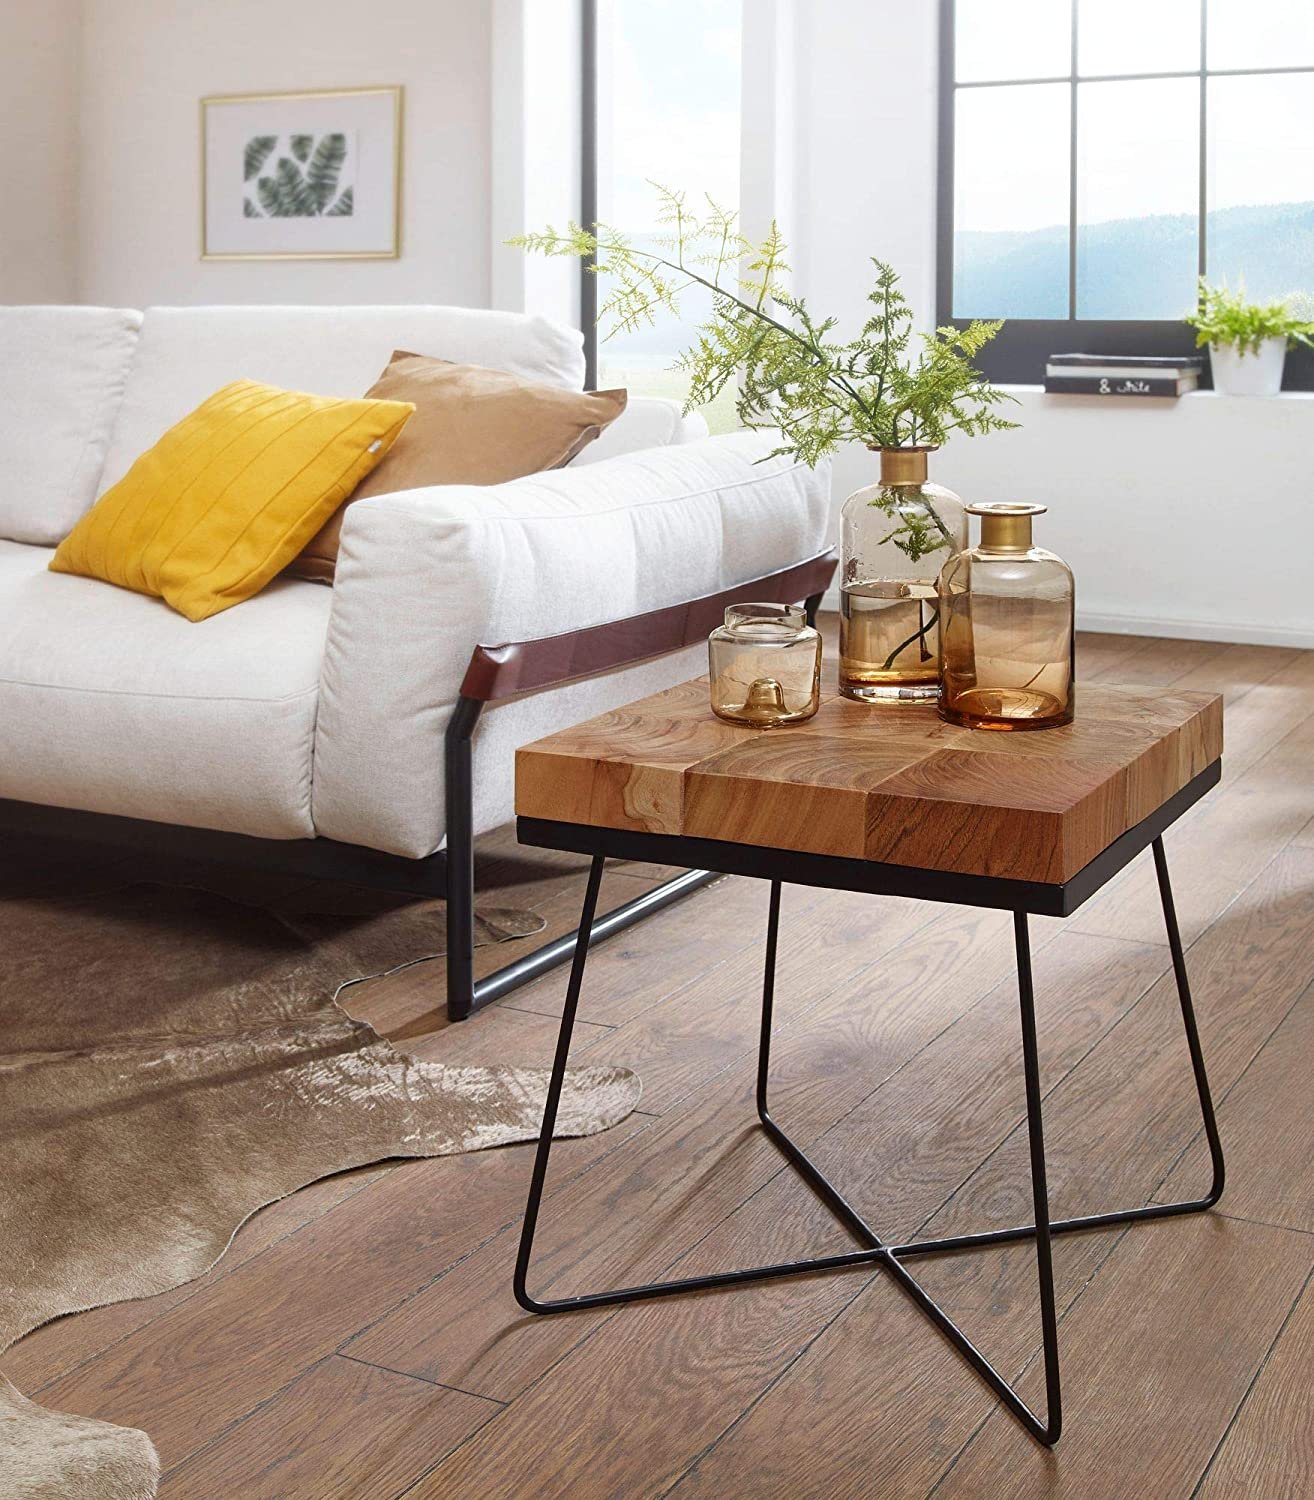 Heather Wood Side Table with Metal Legs - Decornation